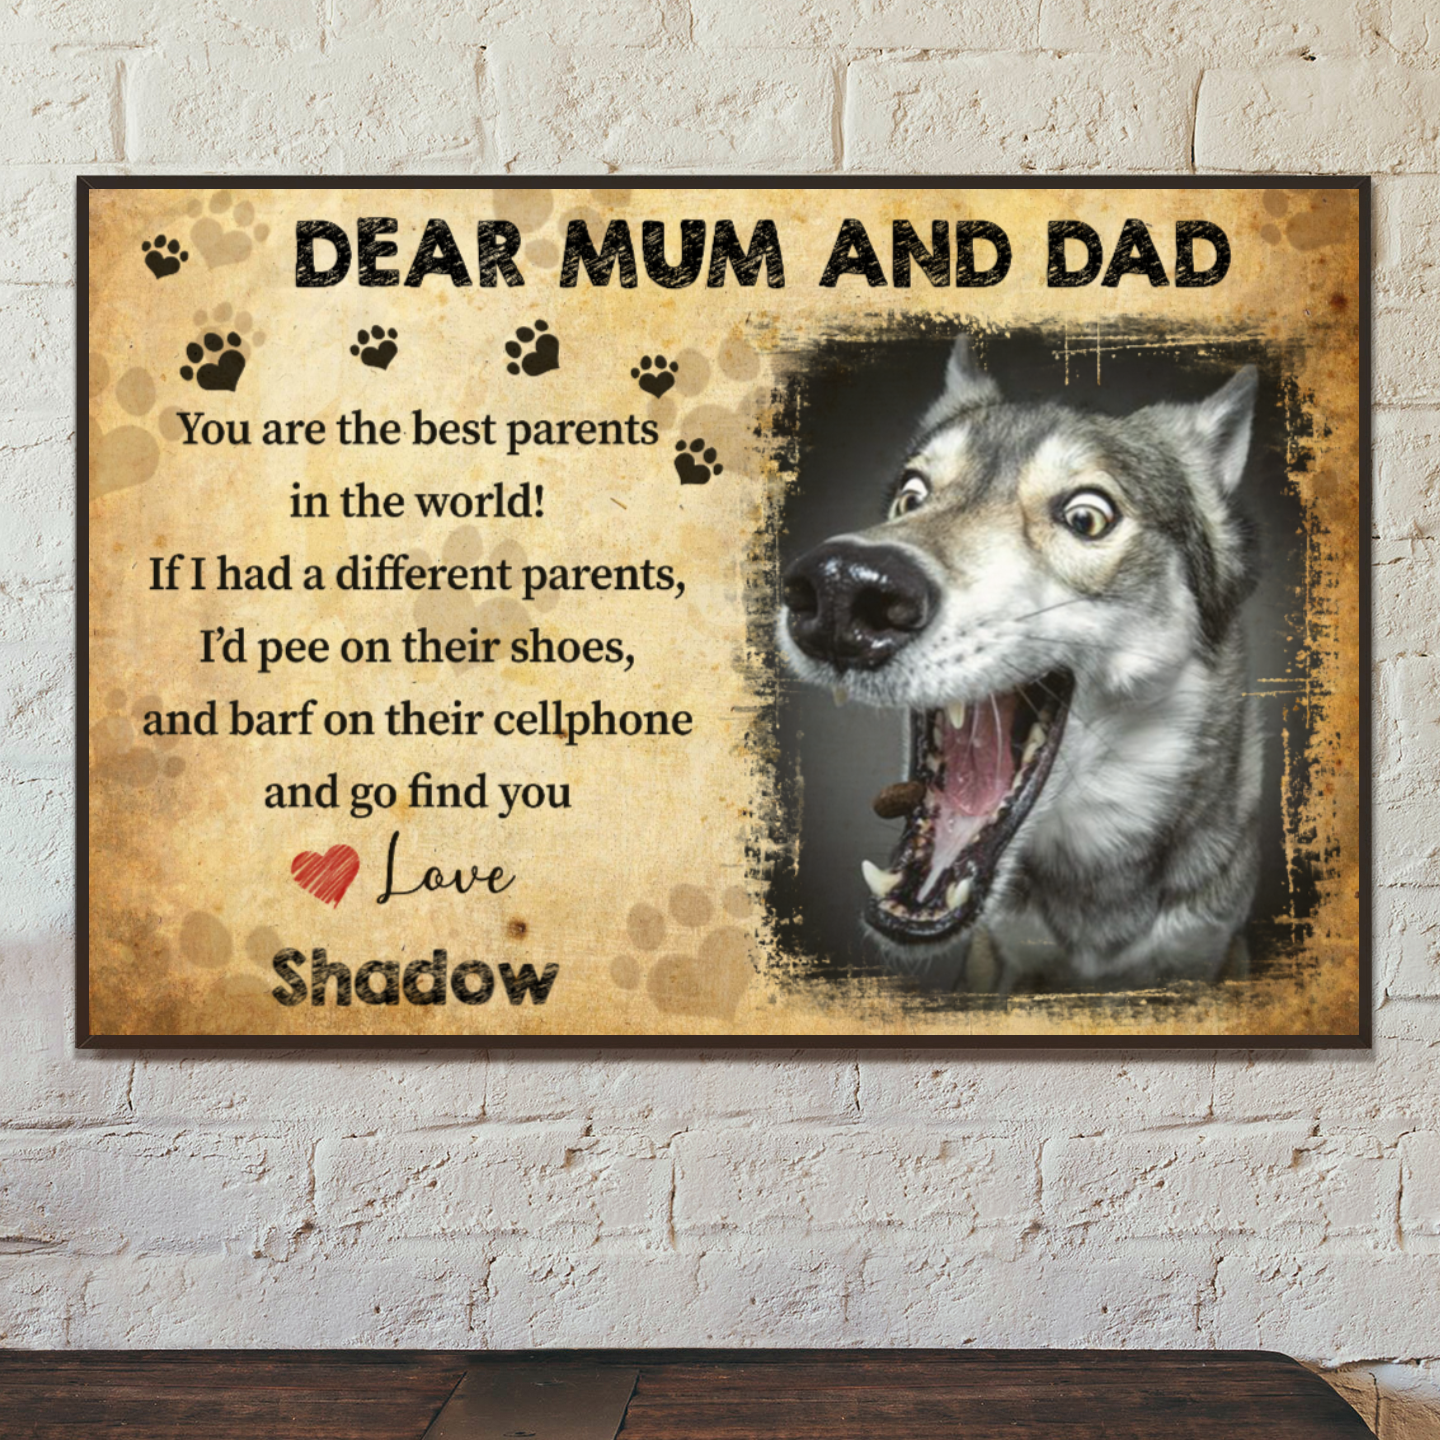 Ciaocustom Poster/Framed Canvas/Unframed Canvas, Custom Dog Image/Name/Background/Text, Gifts For Dog Lovers, Dear Mum and Dad